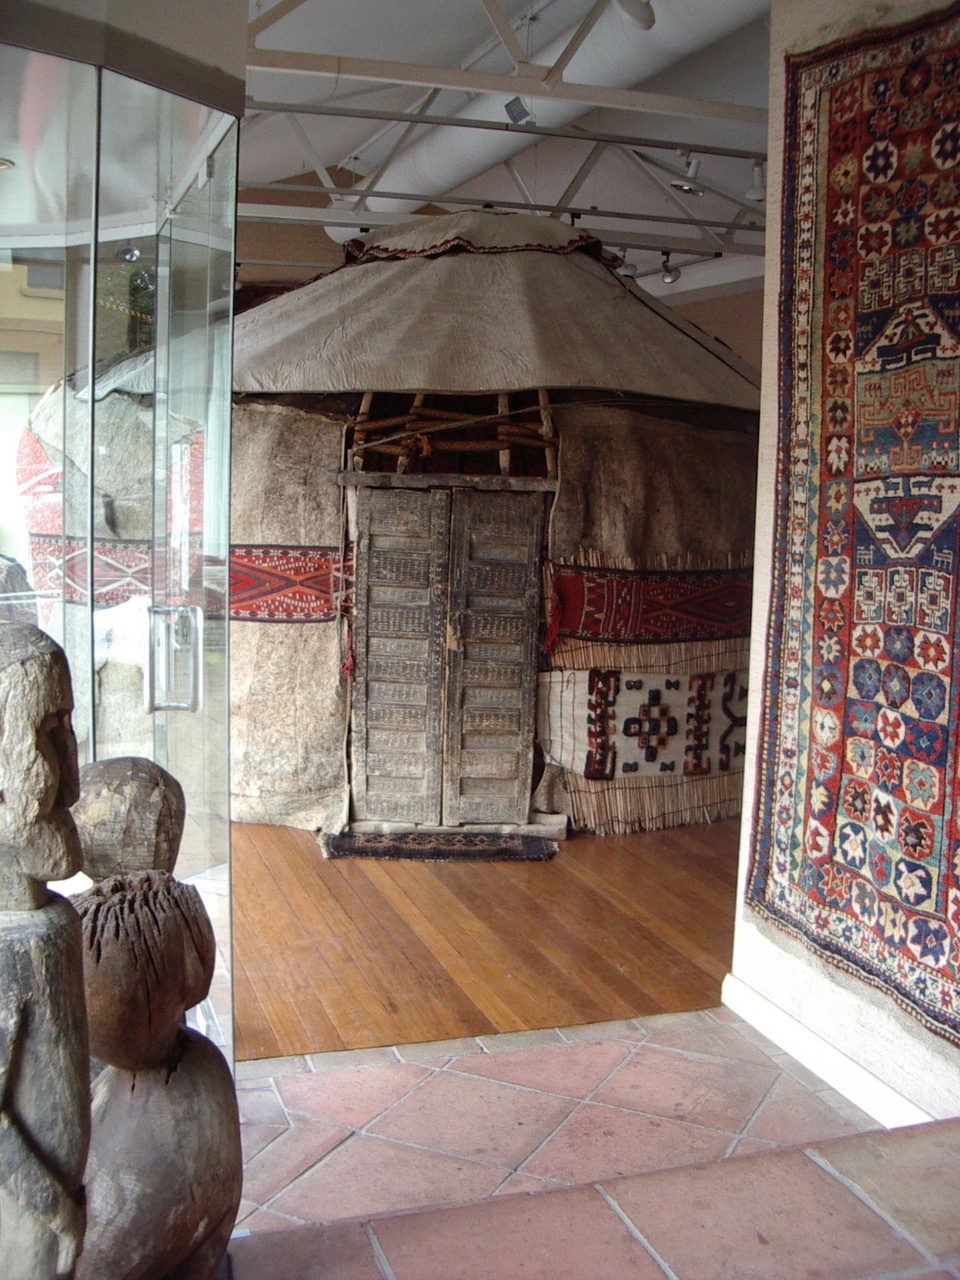 Photo of a Nomadic Rug Galery of a yurt displayed at the Powerhouse Museum, NSW